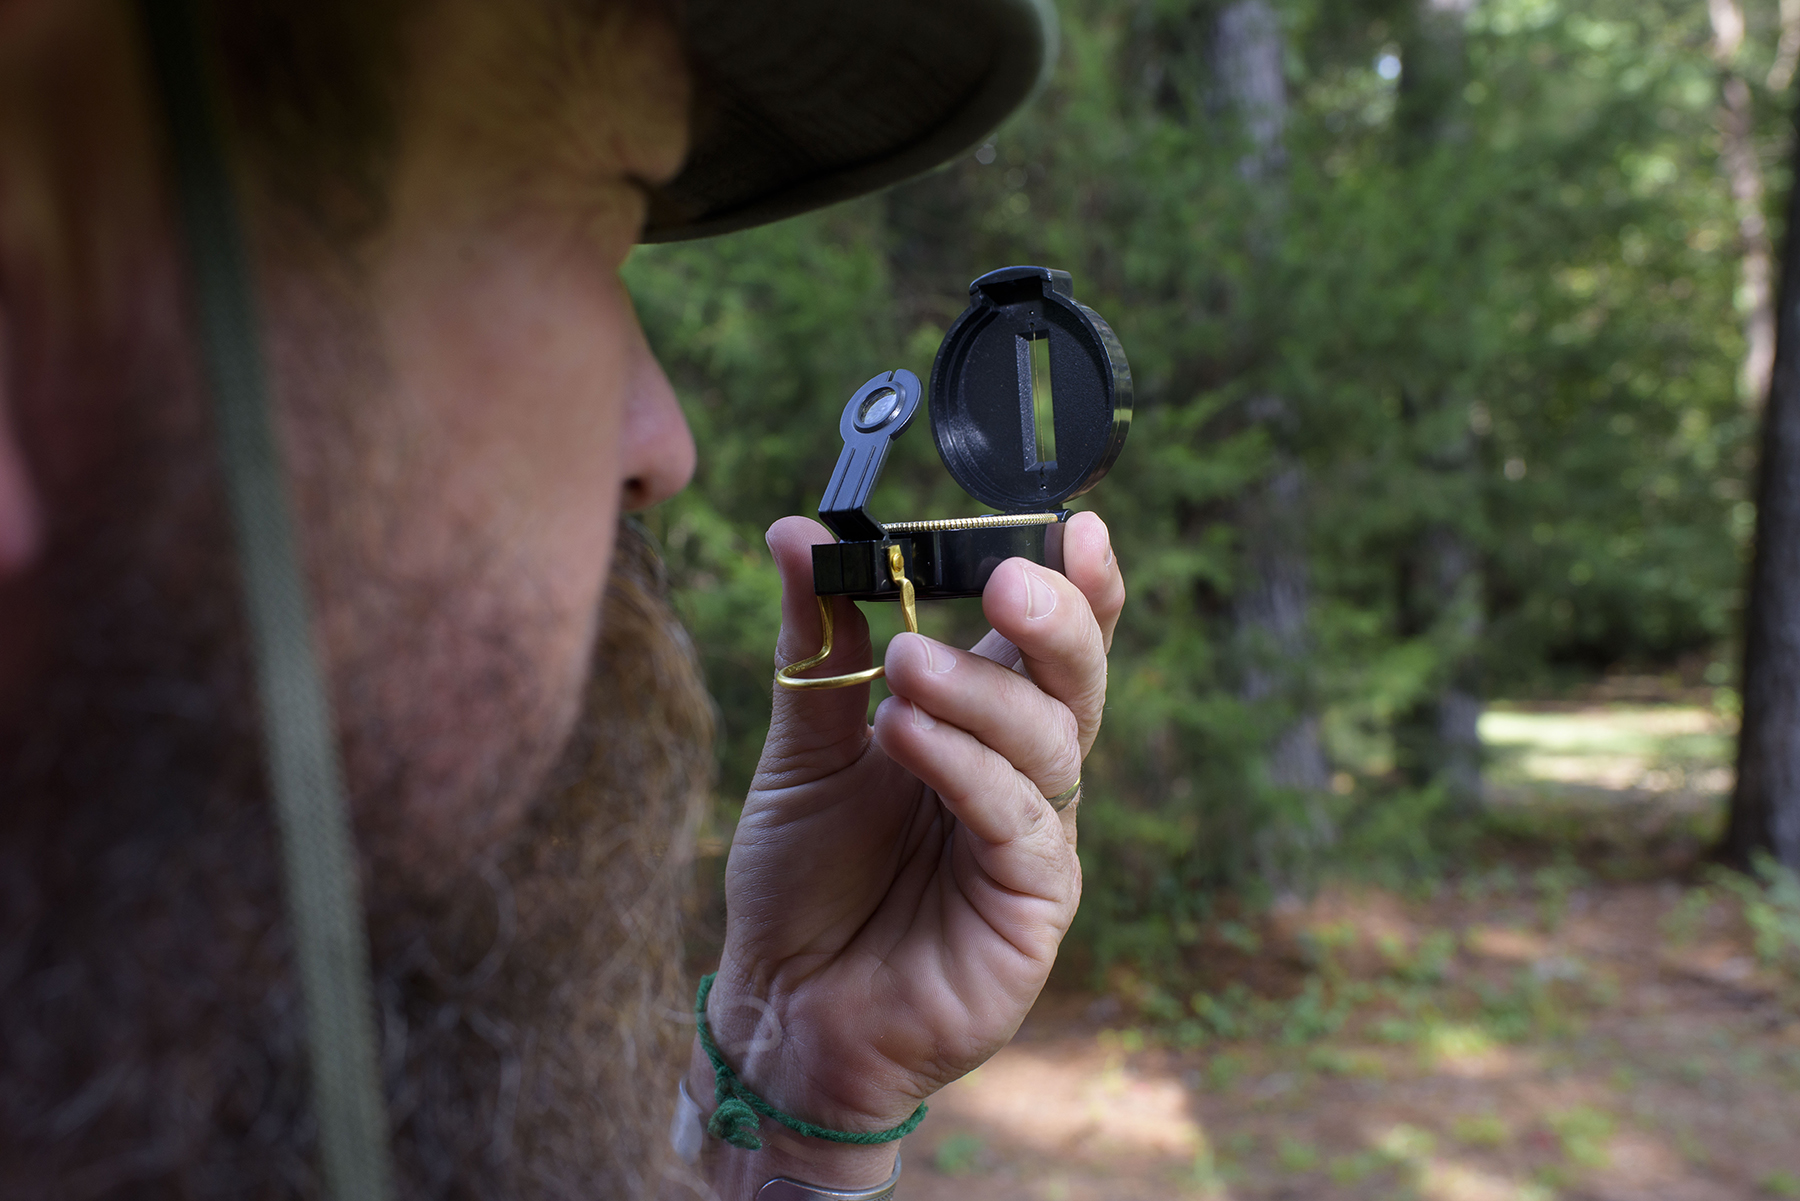 A person holds a compass up and peers through it at an object in the distance.